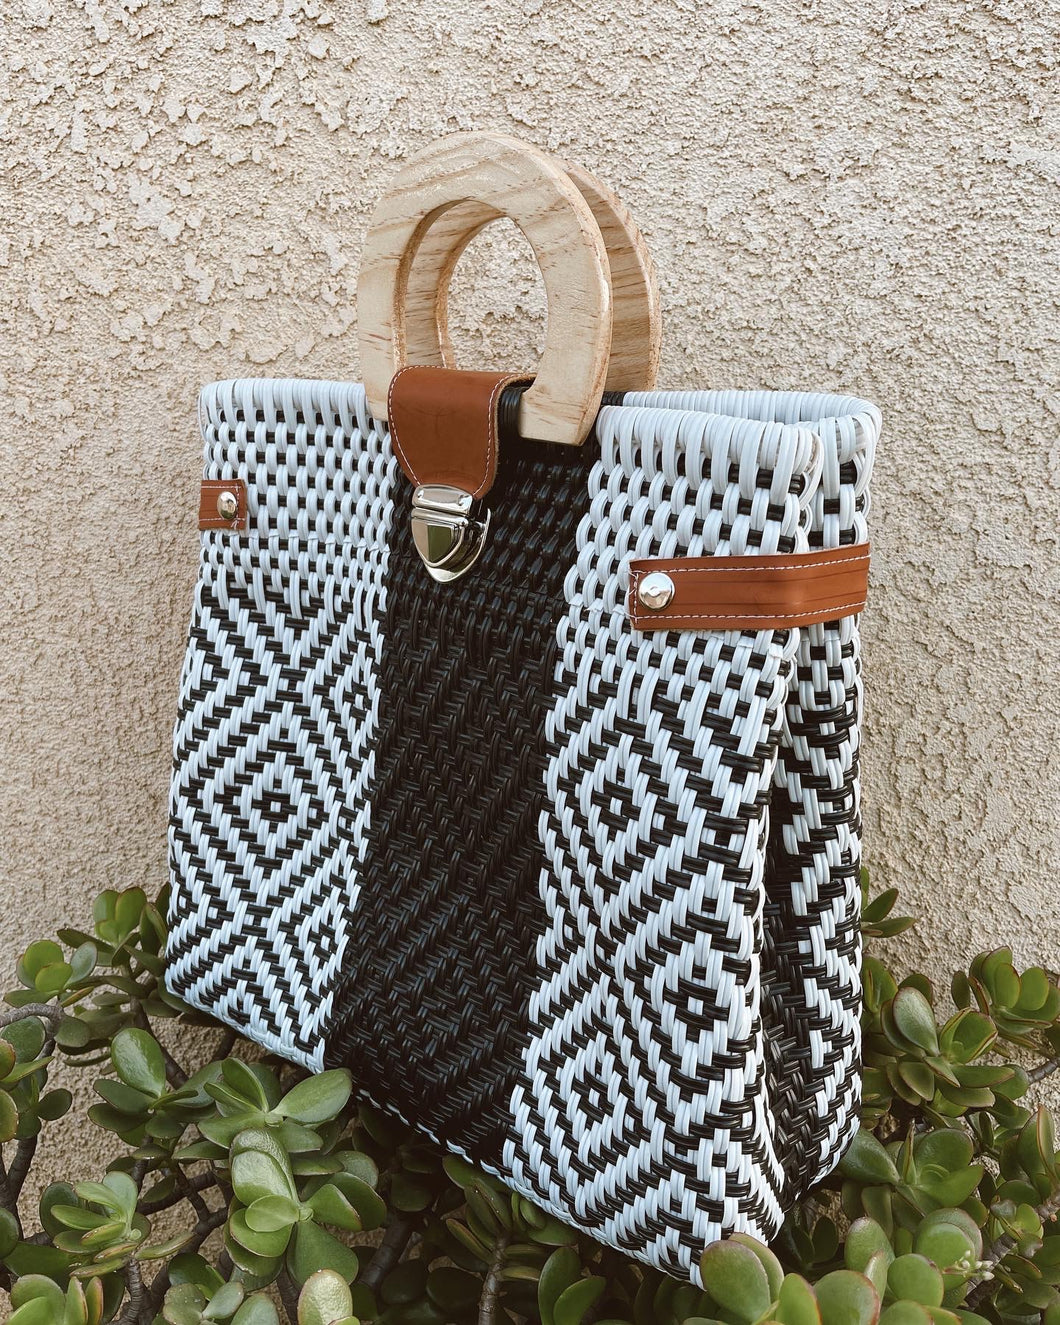 Two Toned Tote w/ Wooden Handle + Leather Straps